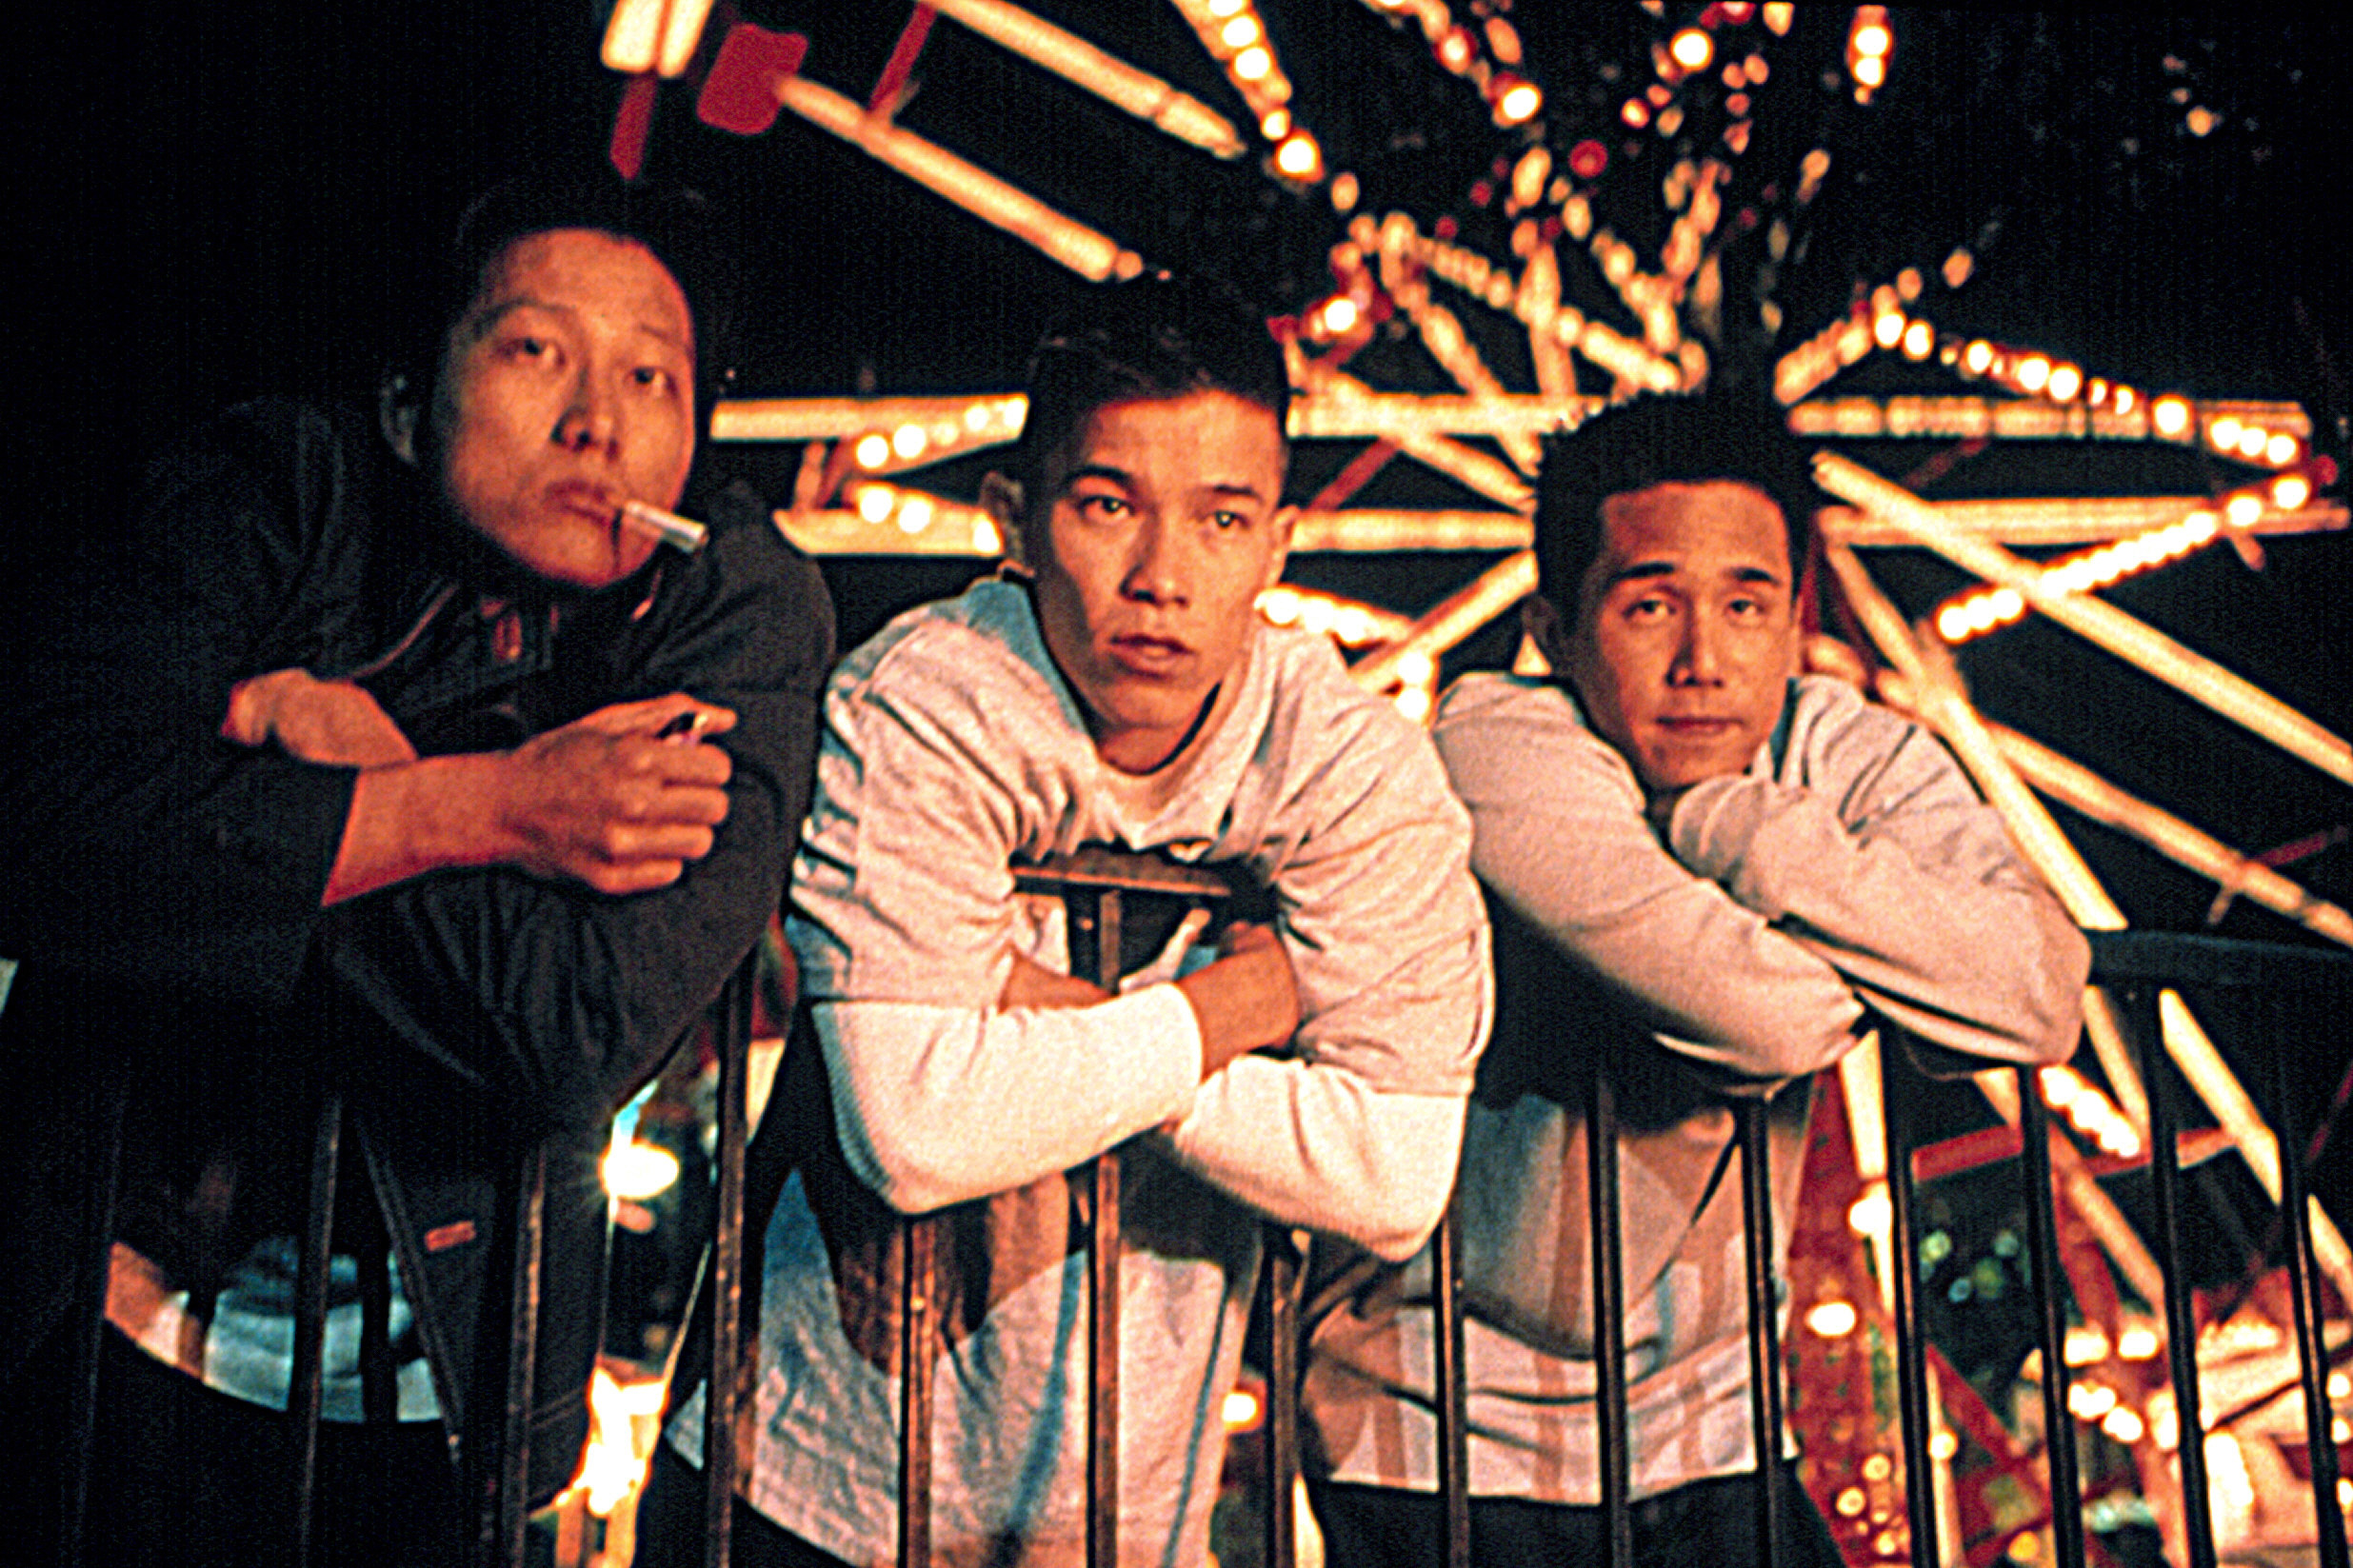 Three men leaning on a fence in front of a Ferris wheel